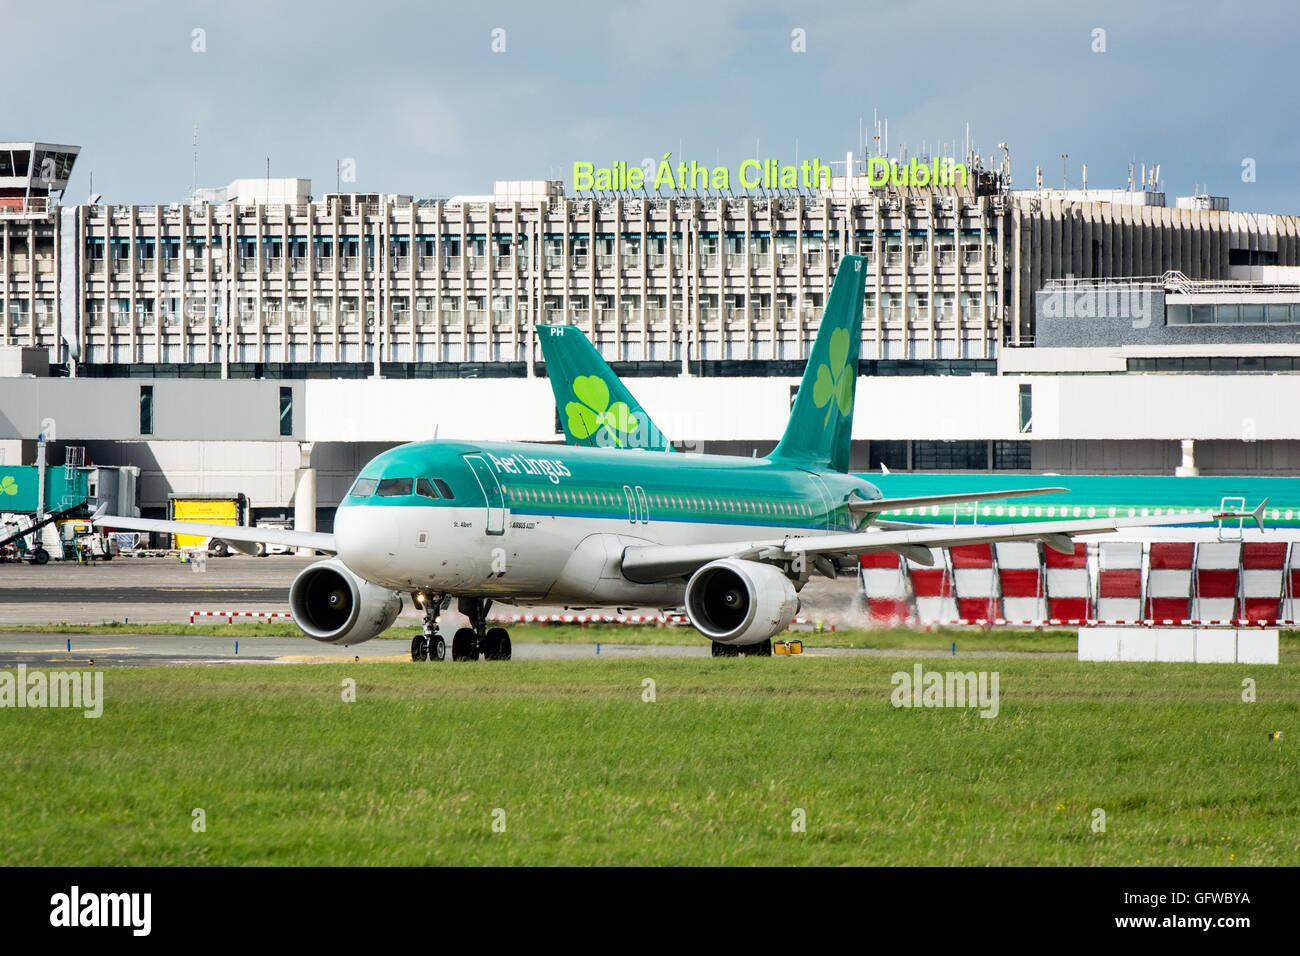 Aer Lingus plane on ground at Dublin airport with Dublin airport sign on terminal behind Stock Photo